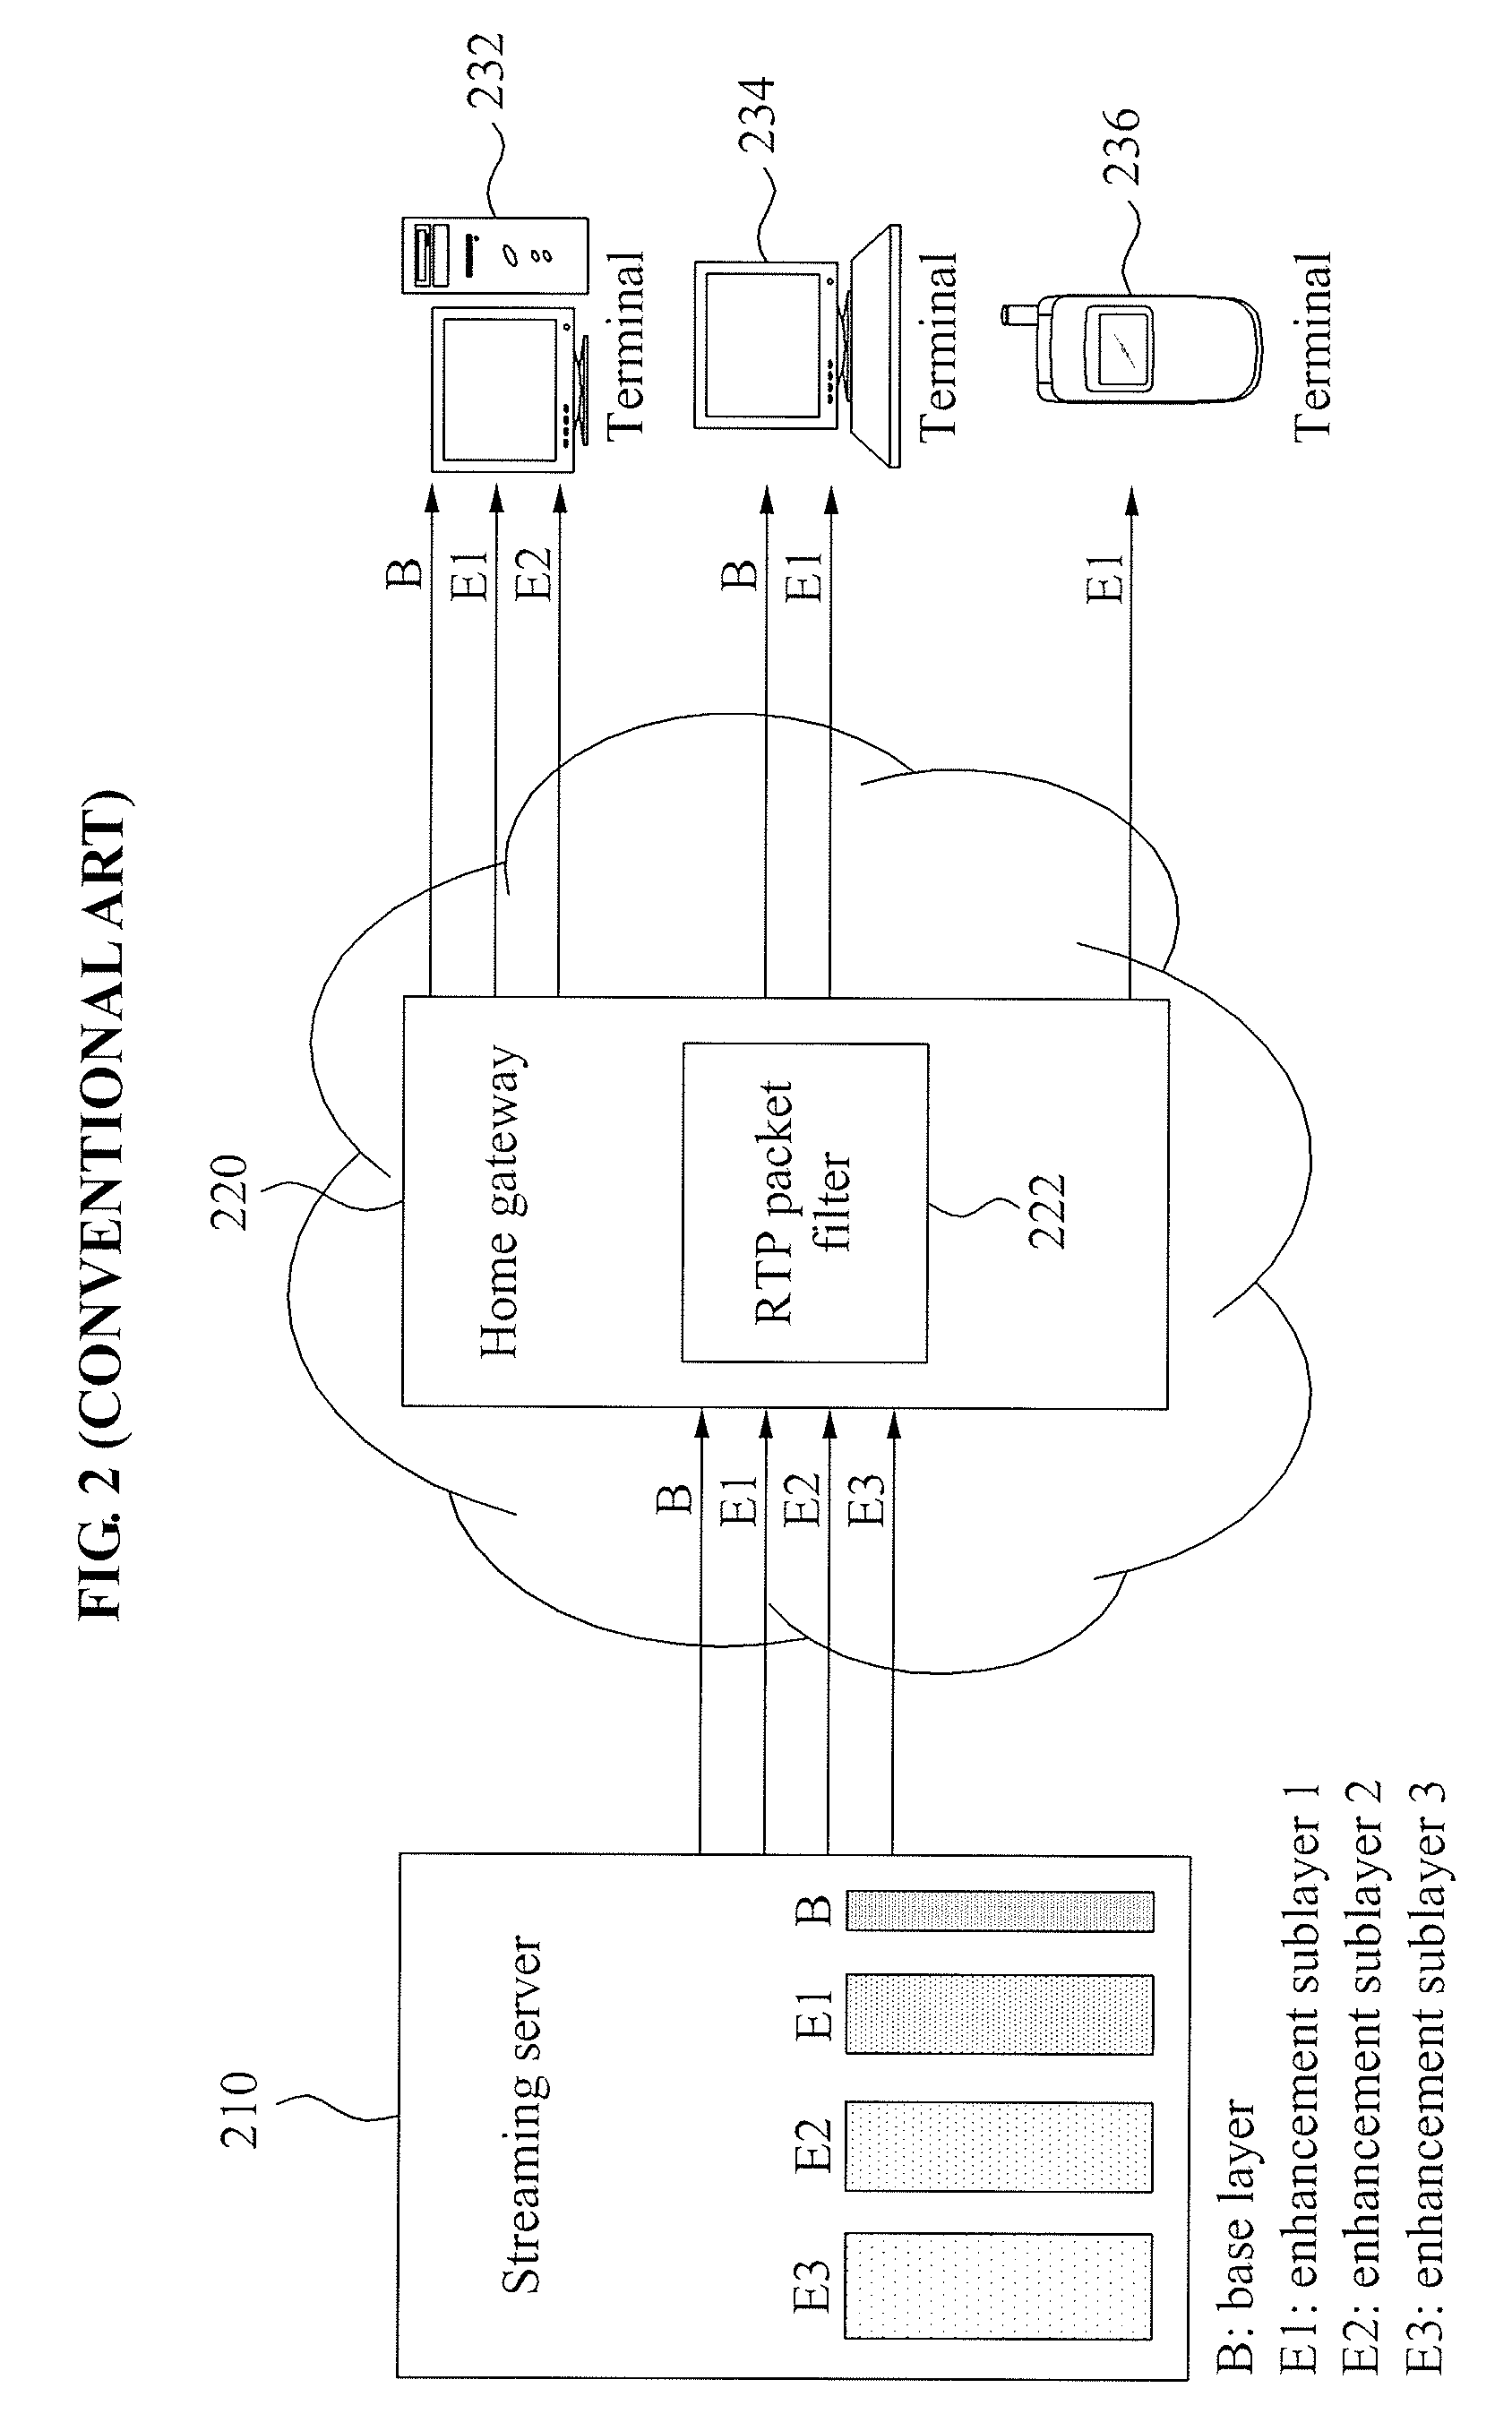 A streaming service system and method for universal video access based on scalable video coding